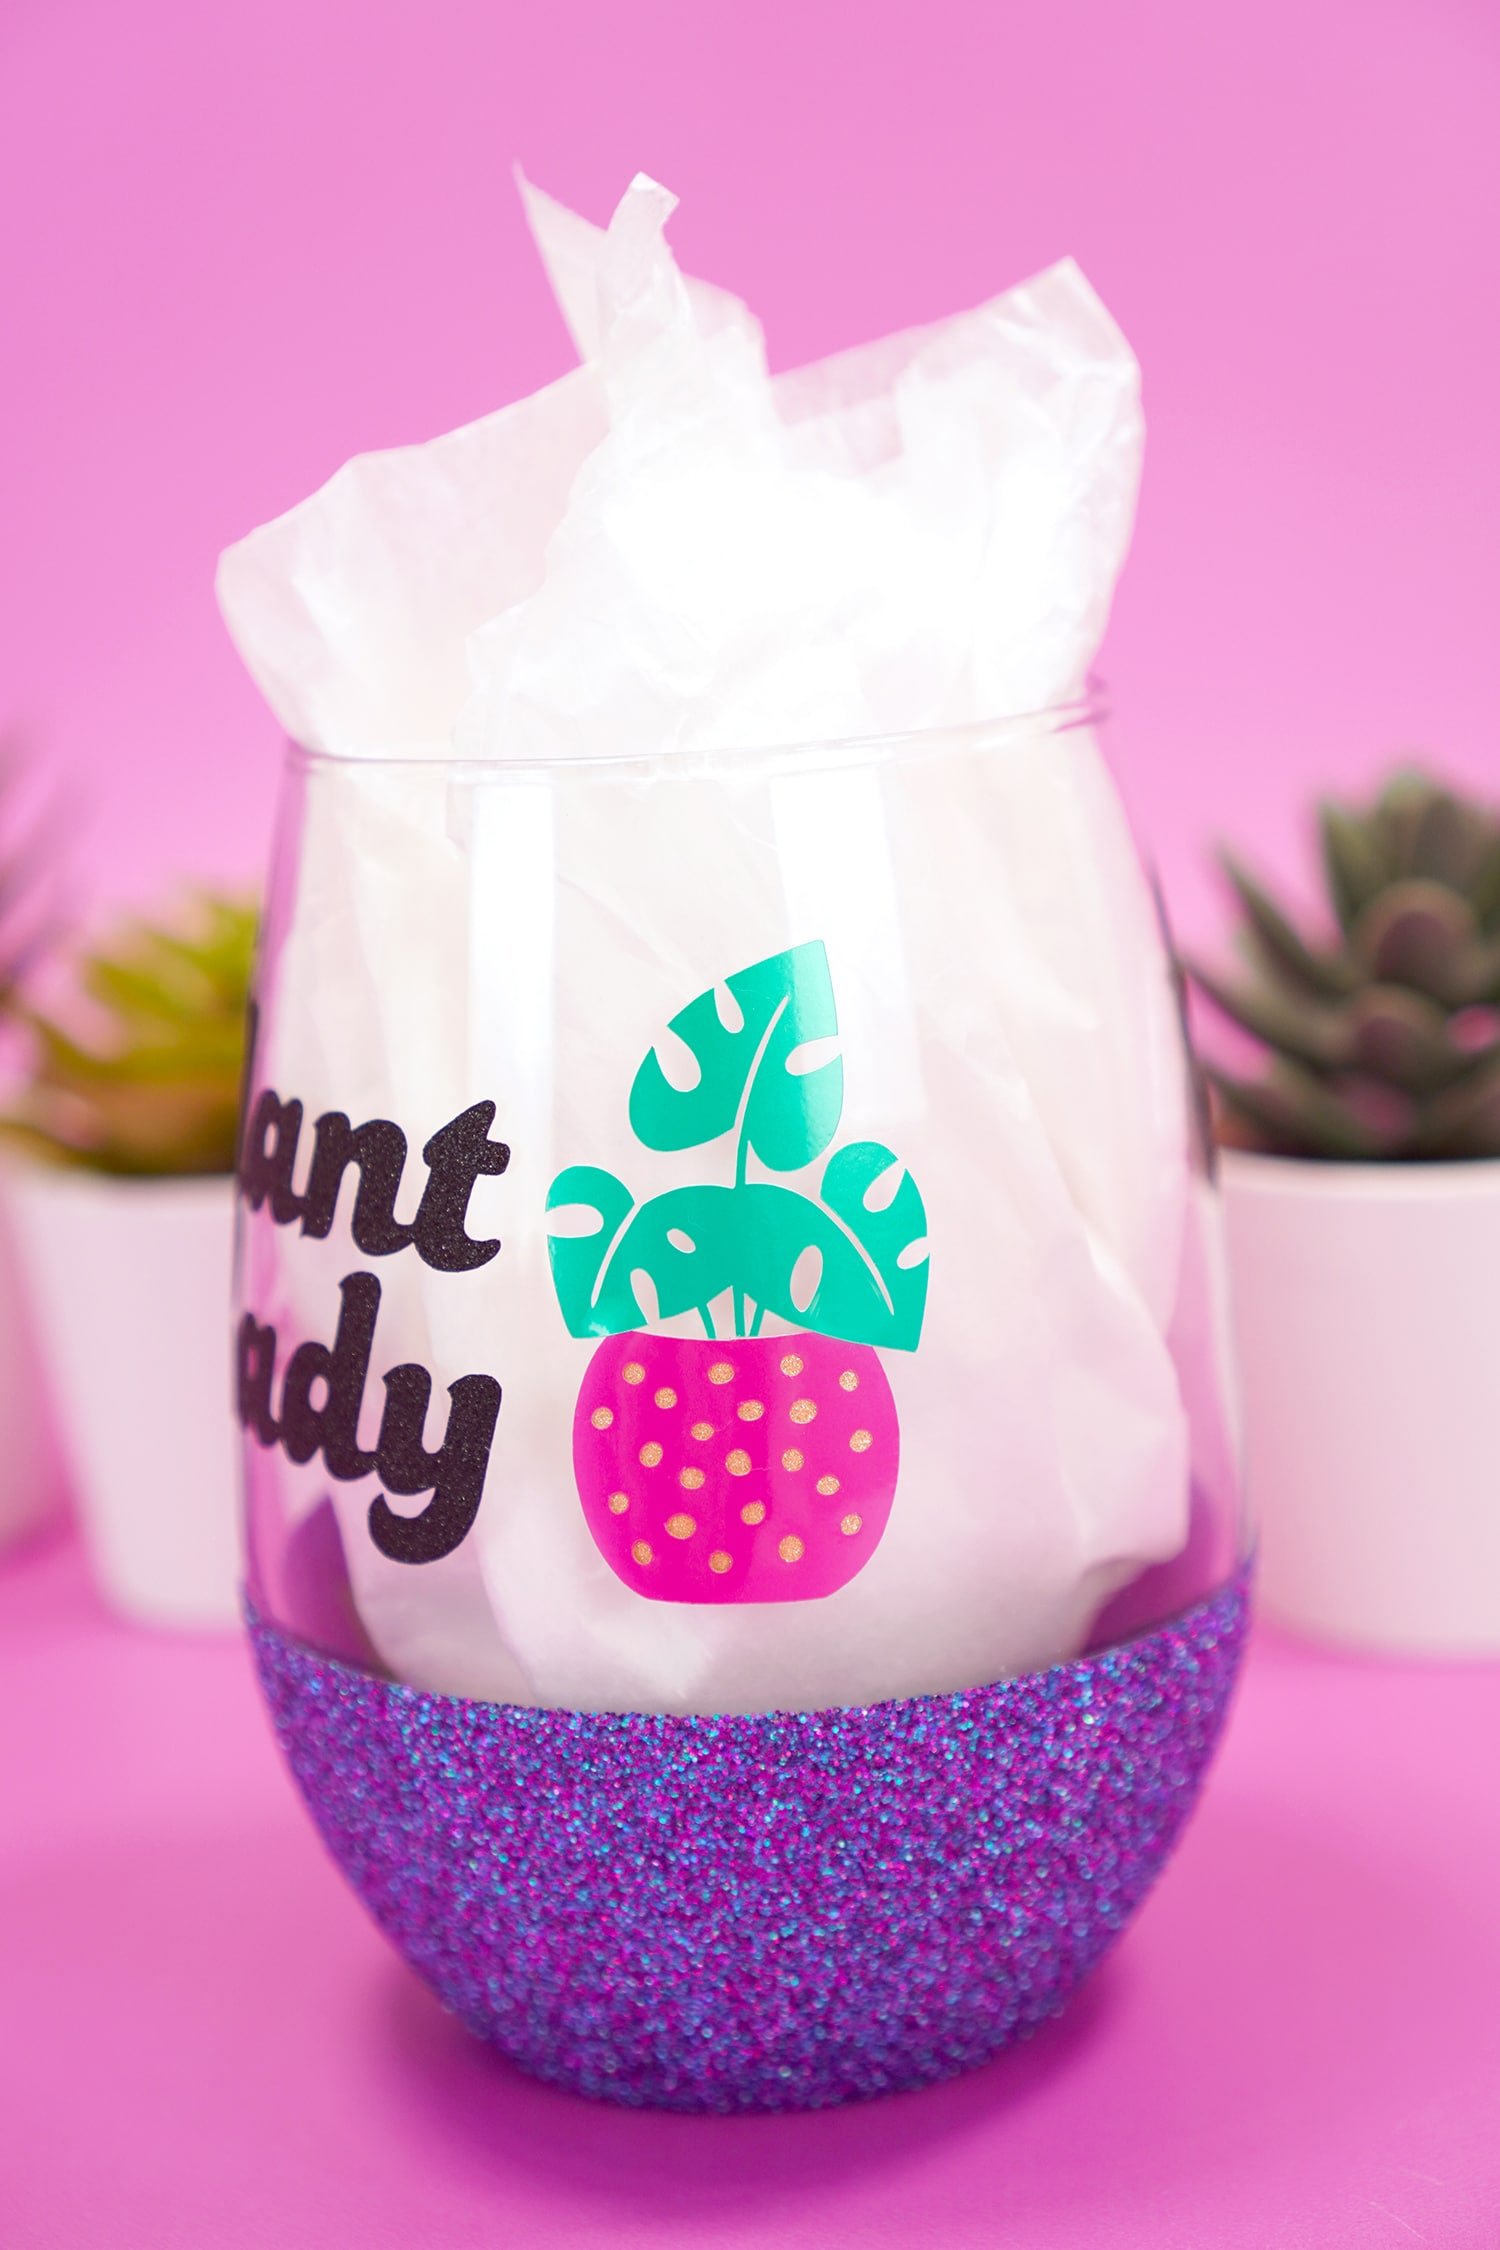 Vinyl plant decal on "Plant Lady" stemlesss glitter wine glass on purple background